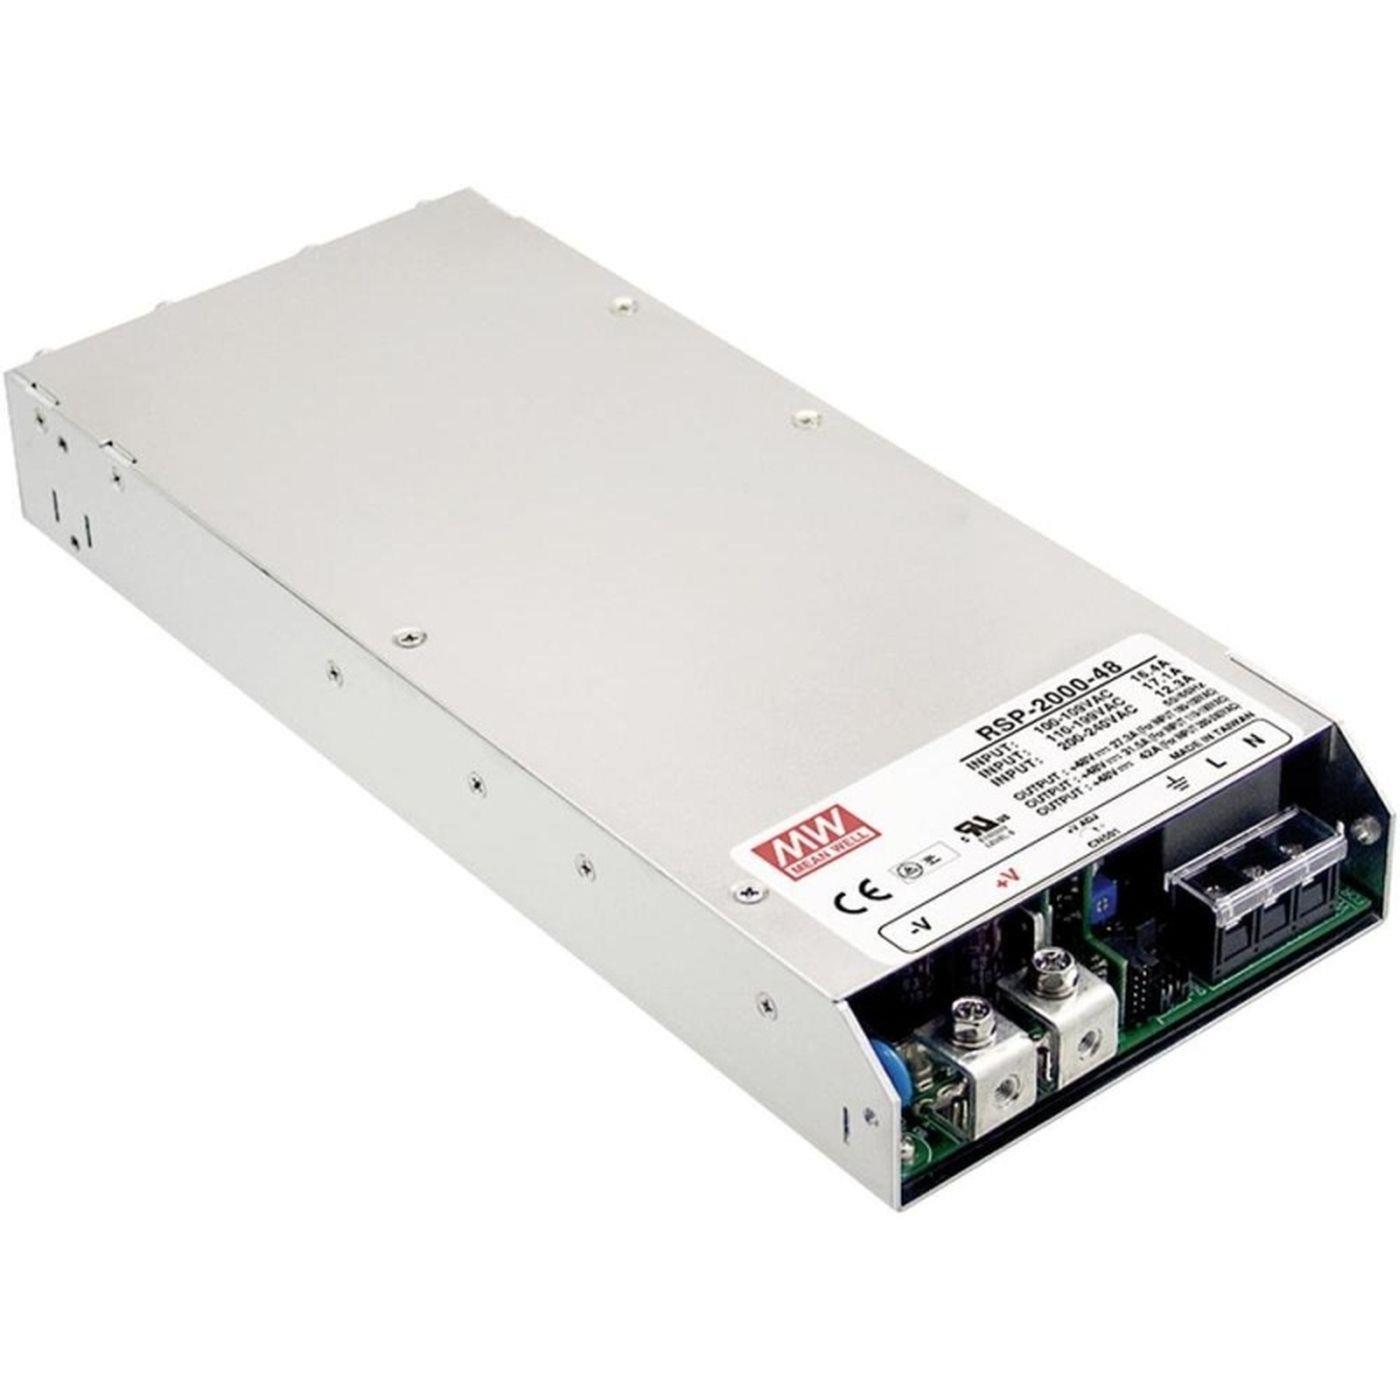 RSP-2000-48 2000W 48V 42A Industrial power supply